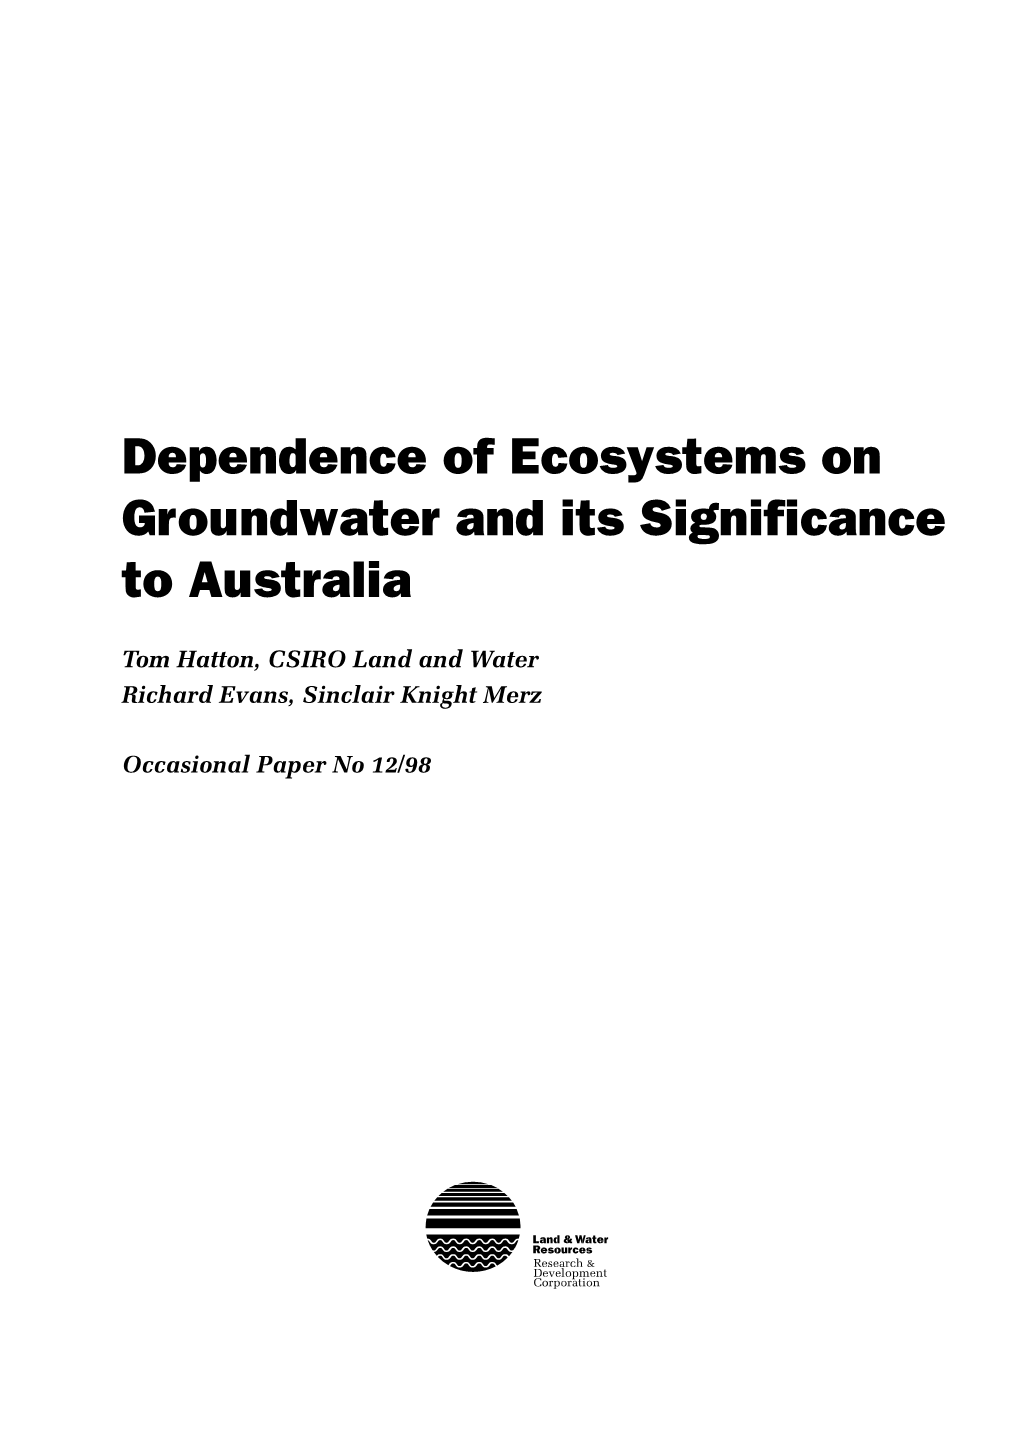 Dependence of Ecosystems on Groundwater and Its Significance to Australia